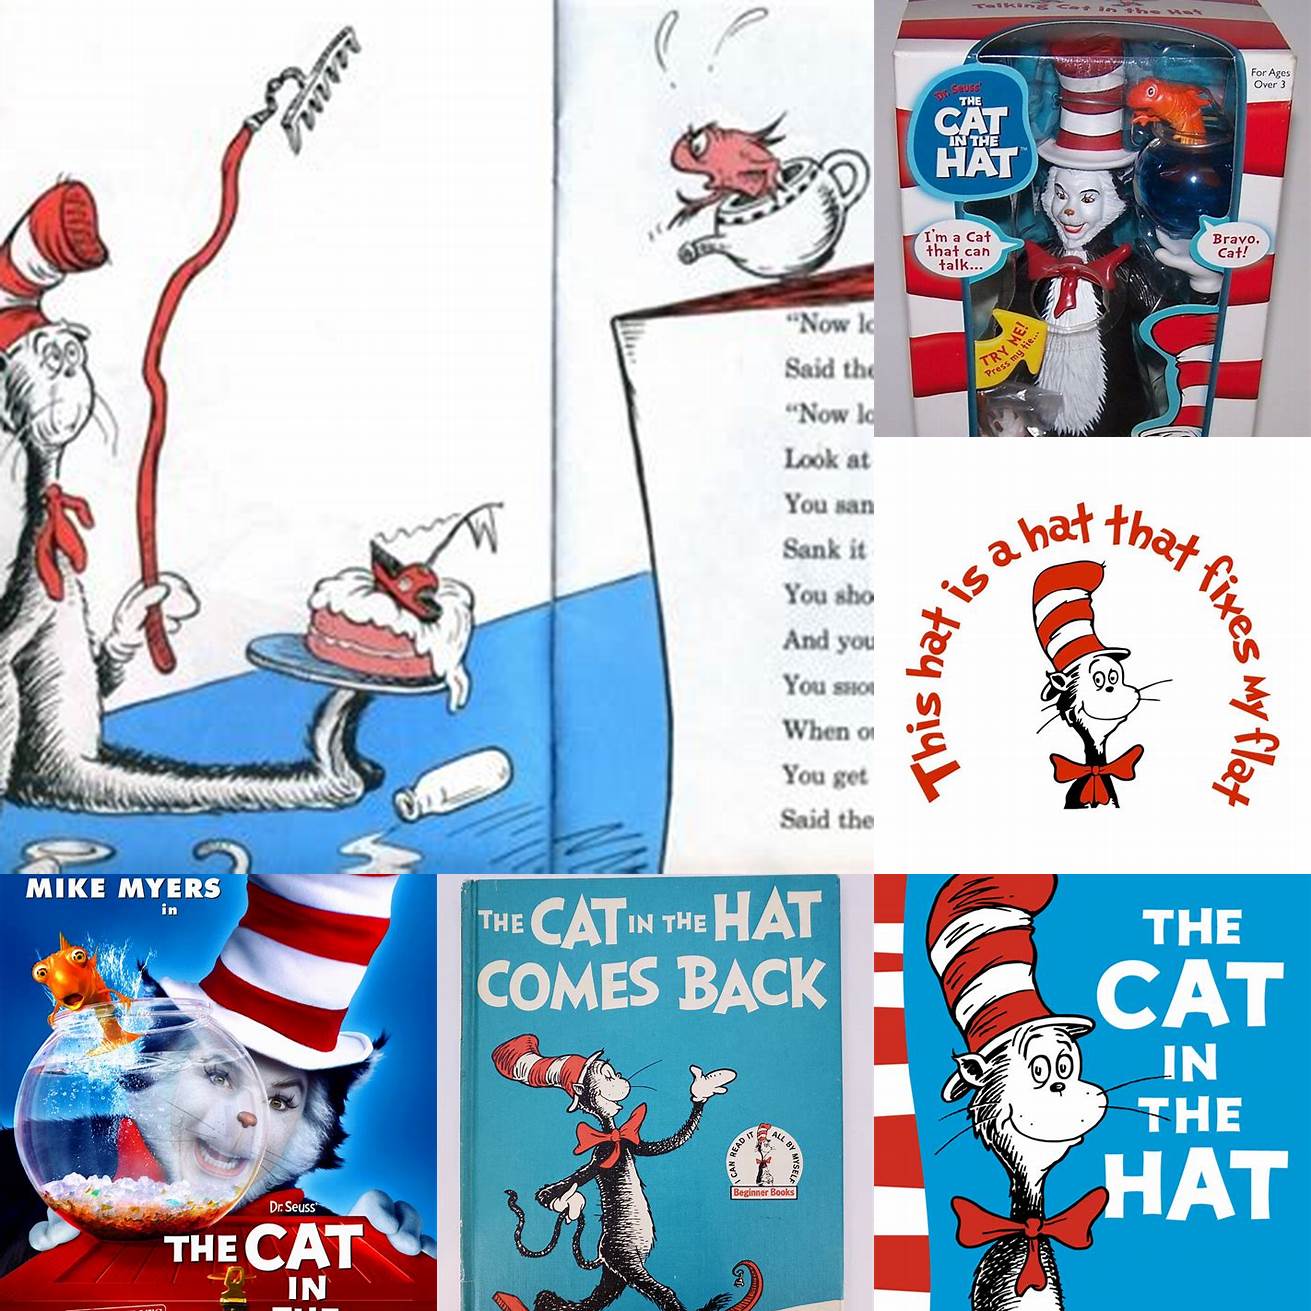 Finish your drink every time the Cat in the Hat fixes everything at the end